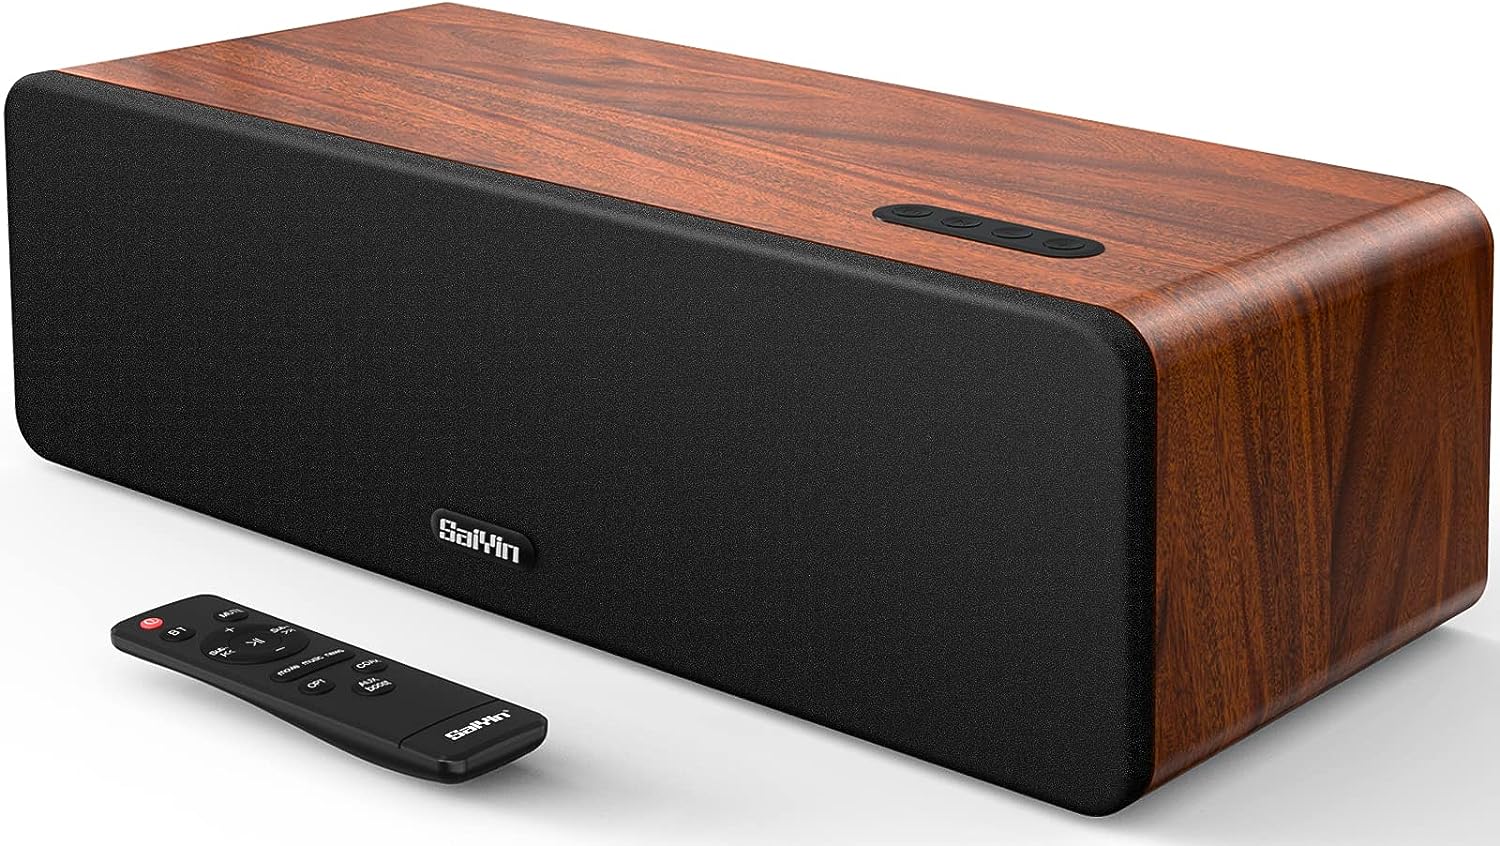 Saiyin Sound Bars for TV, 16.5 Wooden TV Speakers Soundbar Home Theater Surround Sound System with Dual 3.5 Woofers, Bluetooth 5.0 and HDMI ARC/Optical/AUX Input for TV, Projector, Record Player